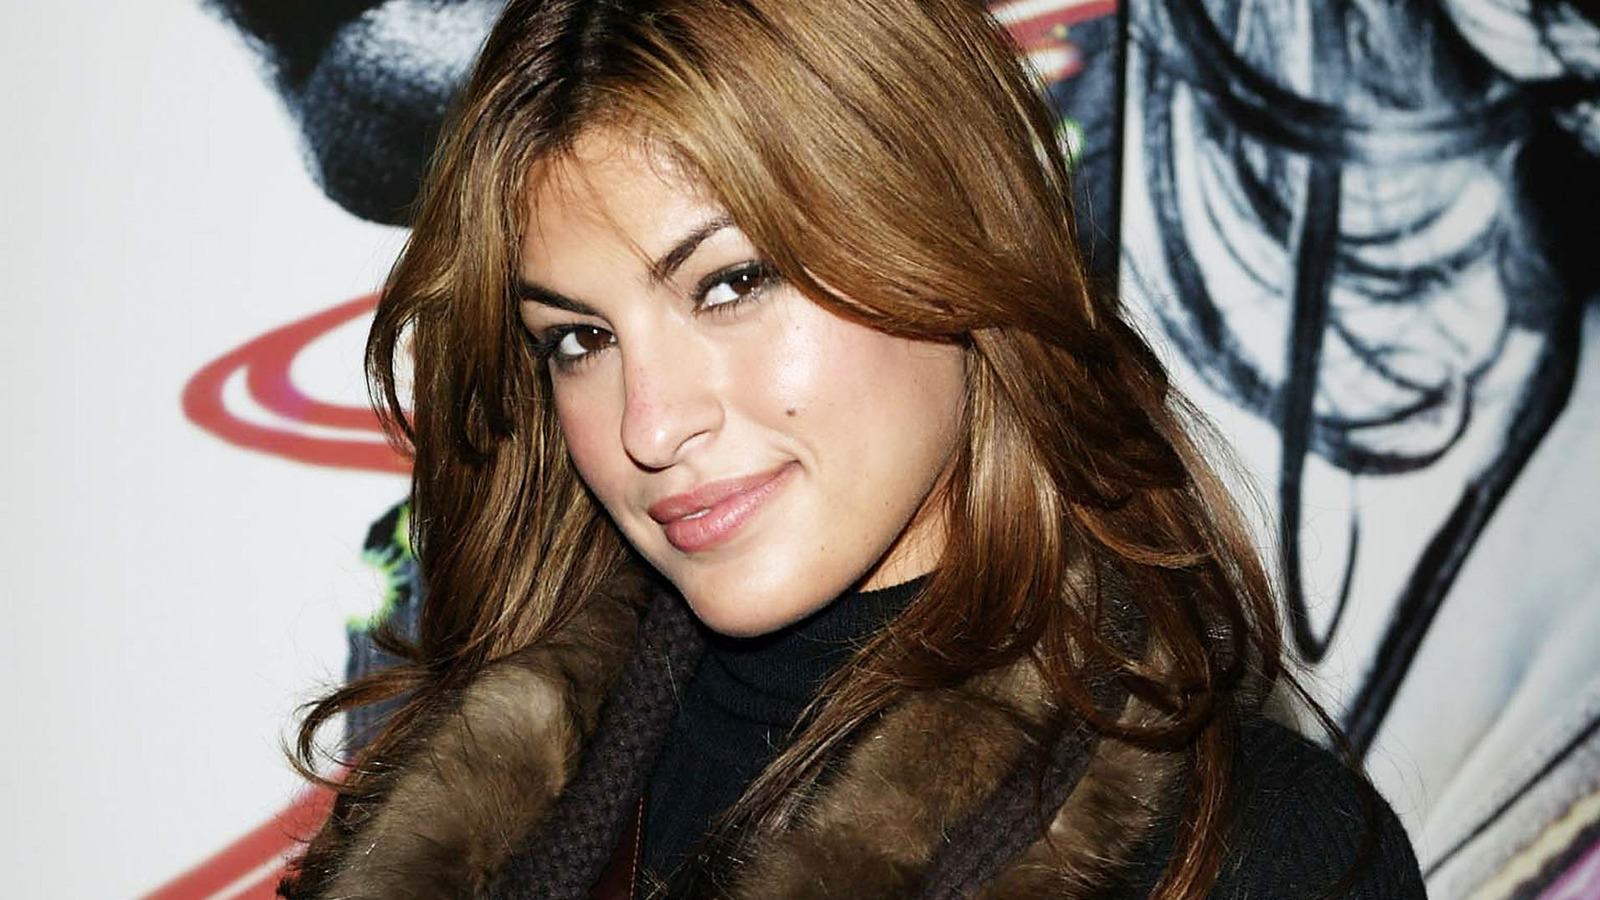 Eva Mendes' Transformation Over The Years Is A Sight To See